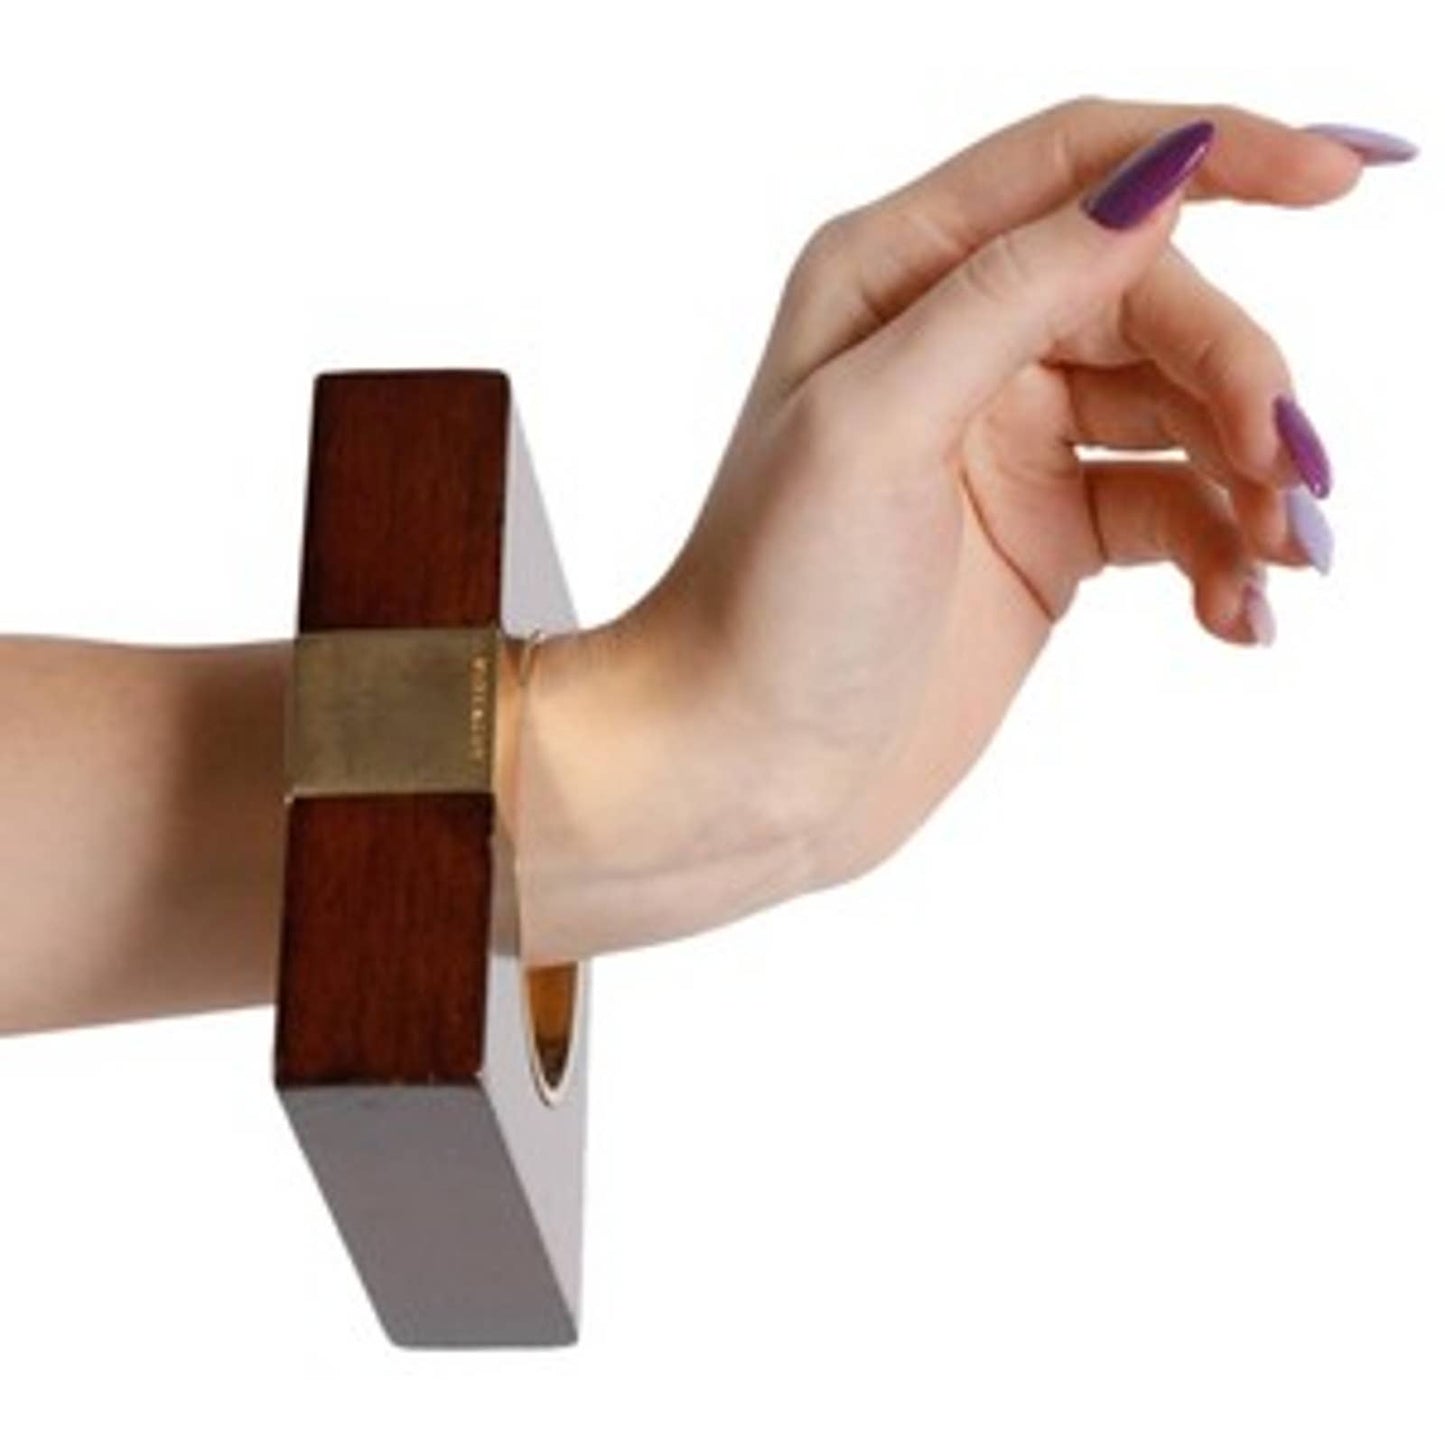 GIVENCHY PARIS Dark Wood with Gold Accents Square Bangle Bracelet